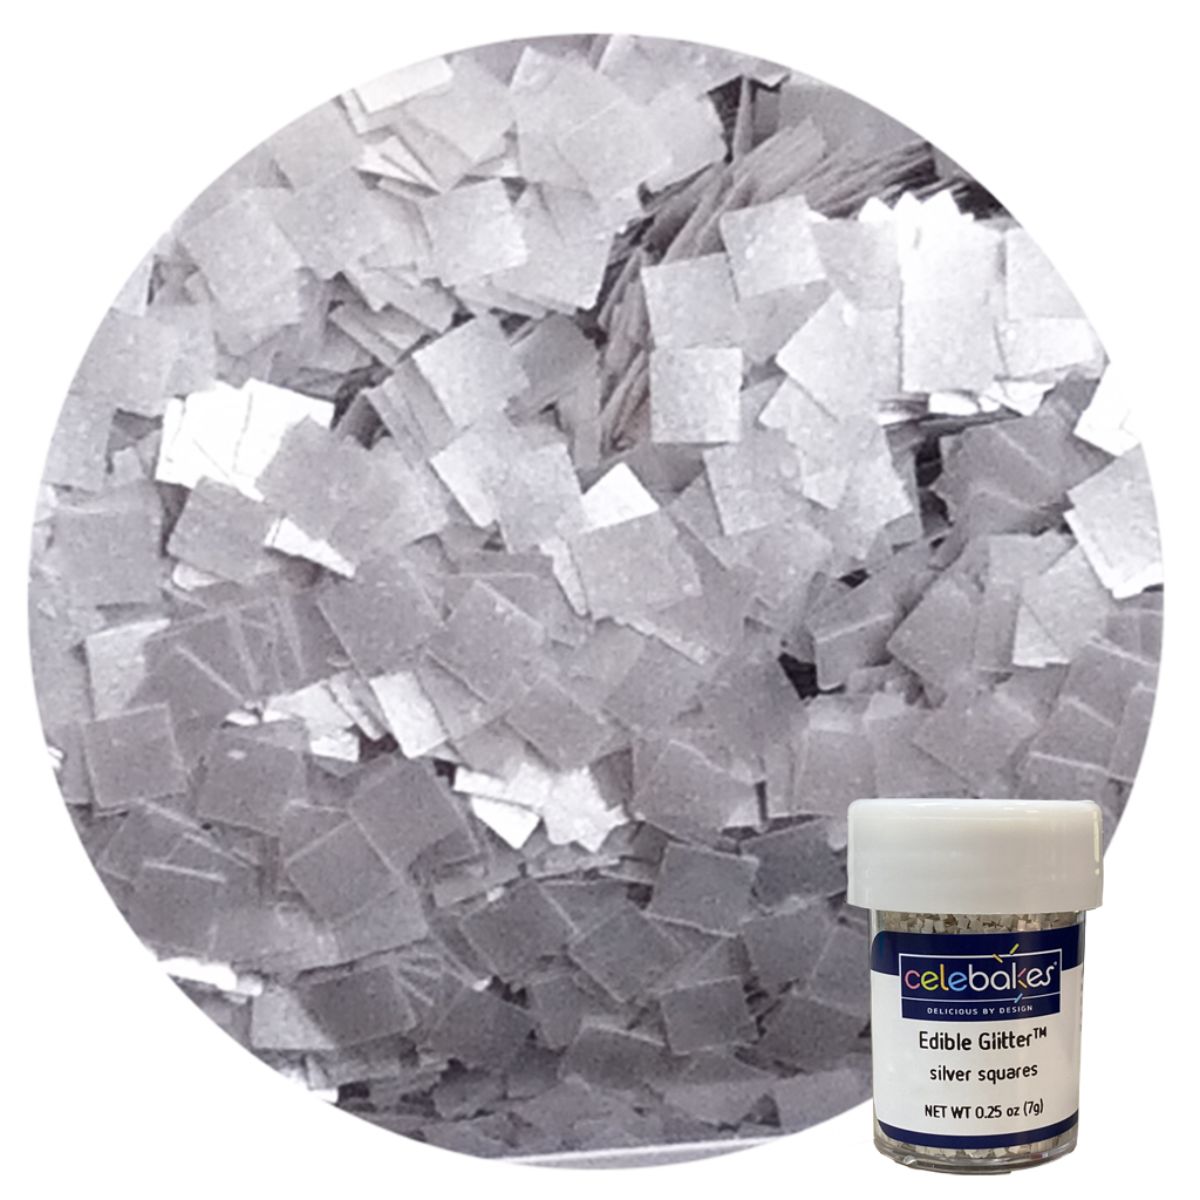 Celebakes by CK Products Silver Squares Edible Glitter, 25 oz.